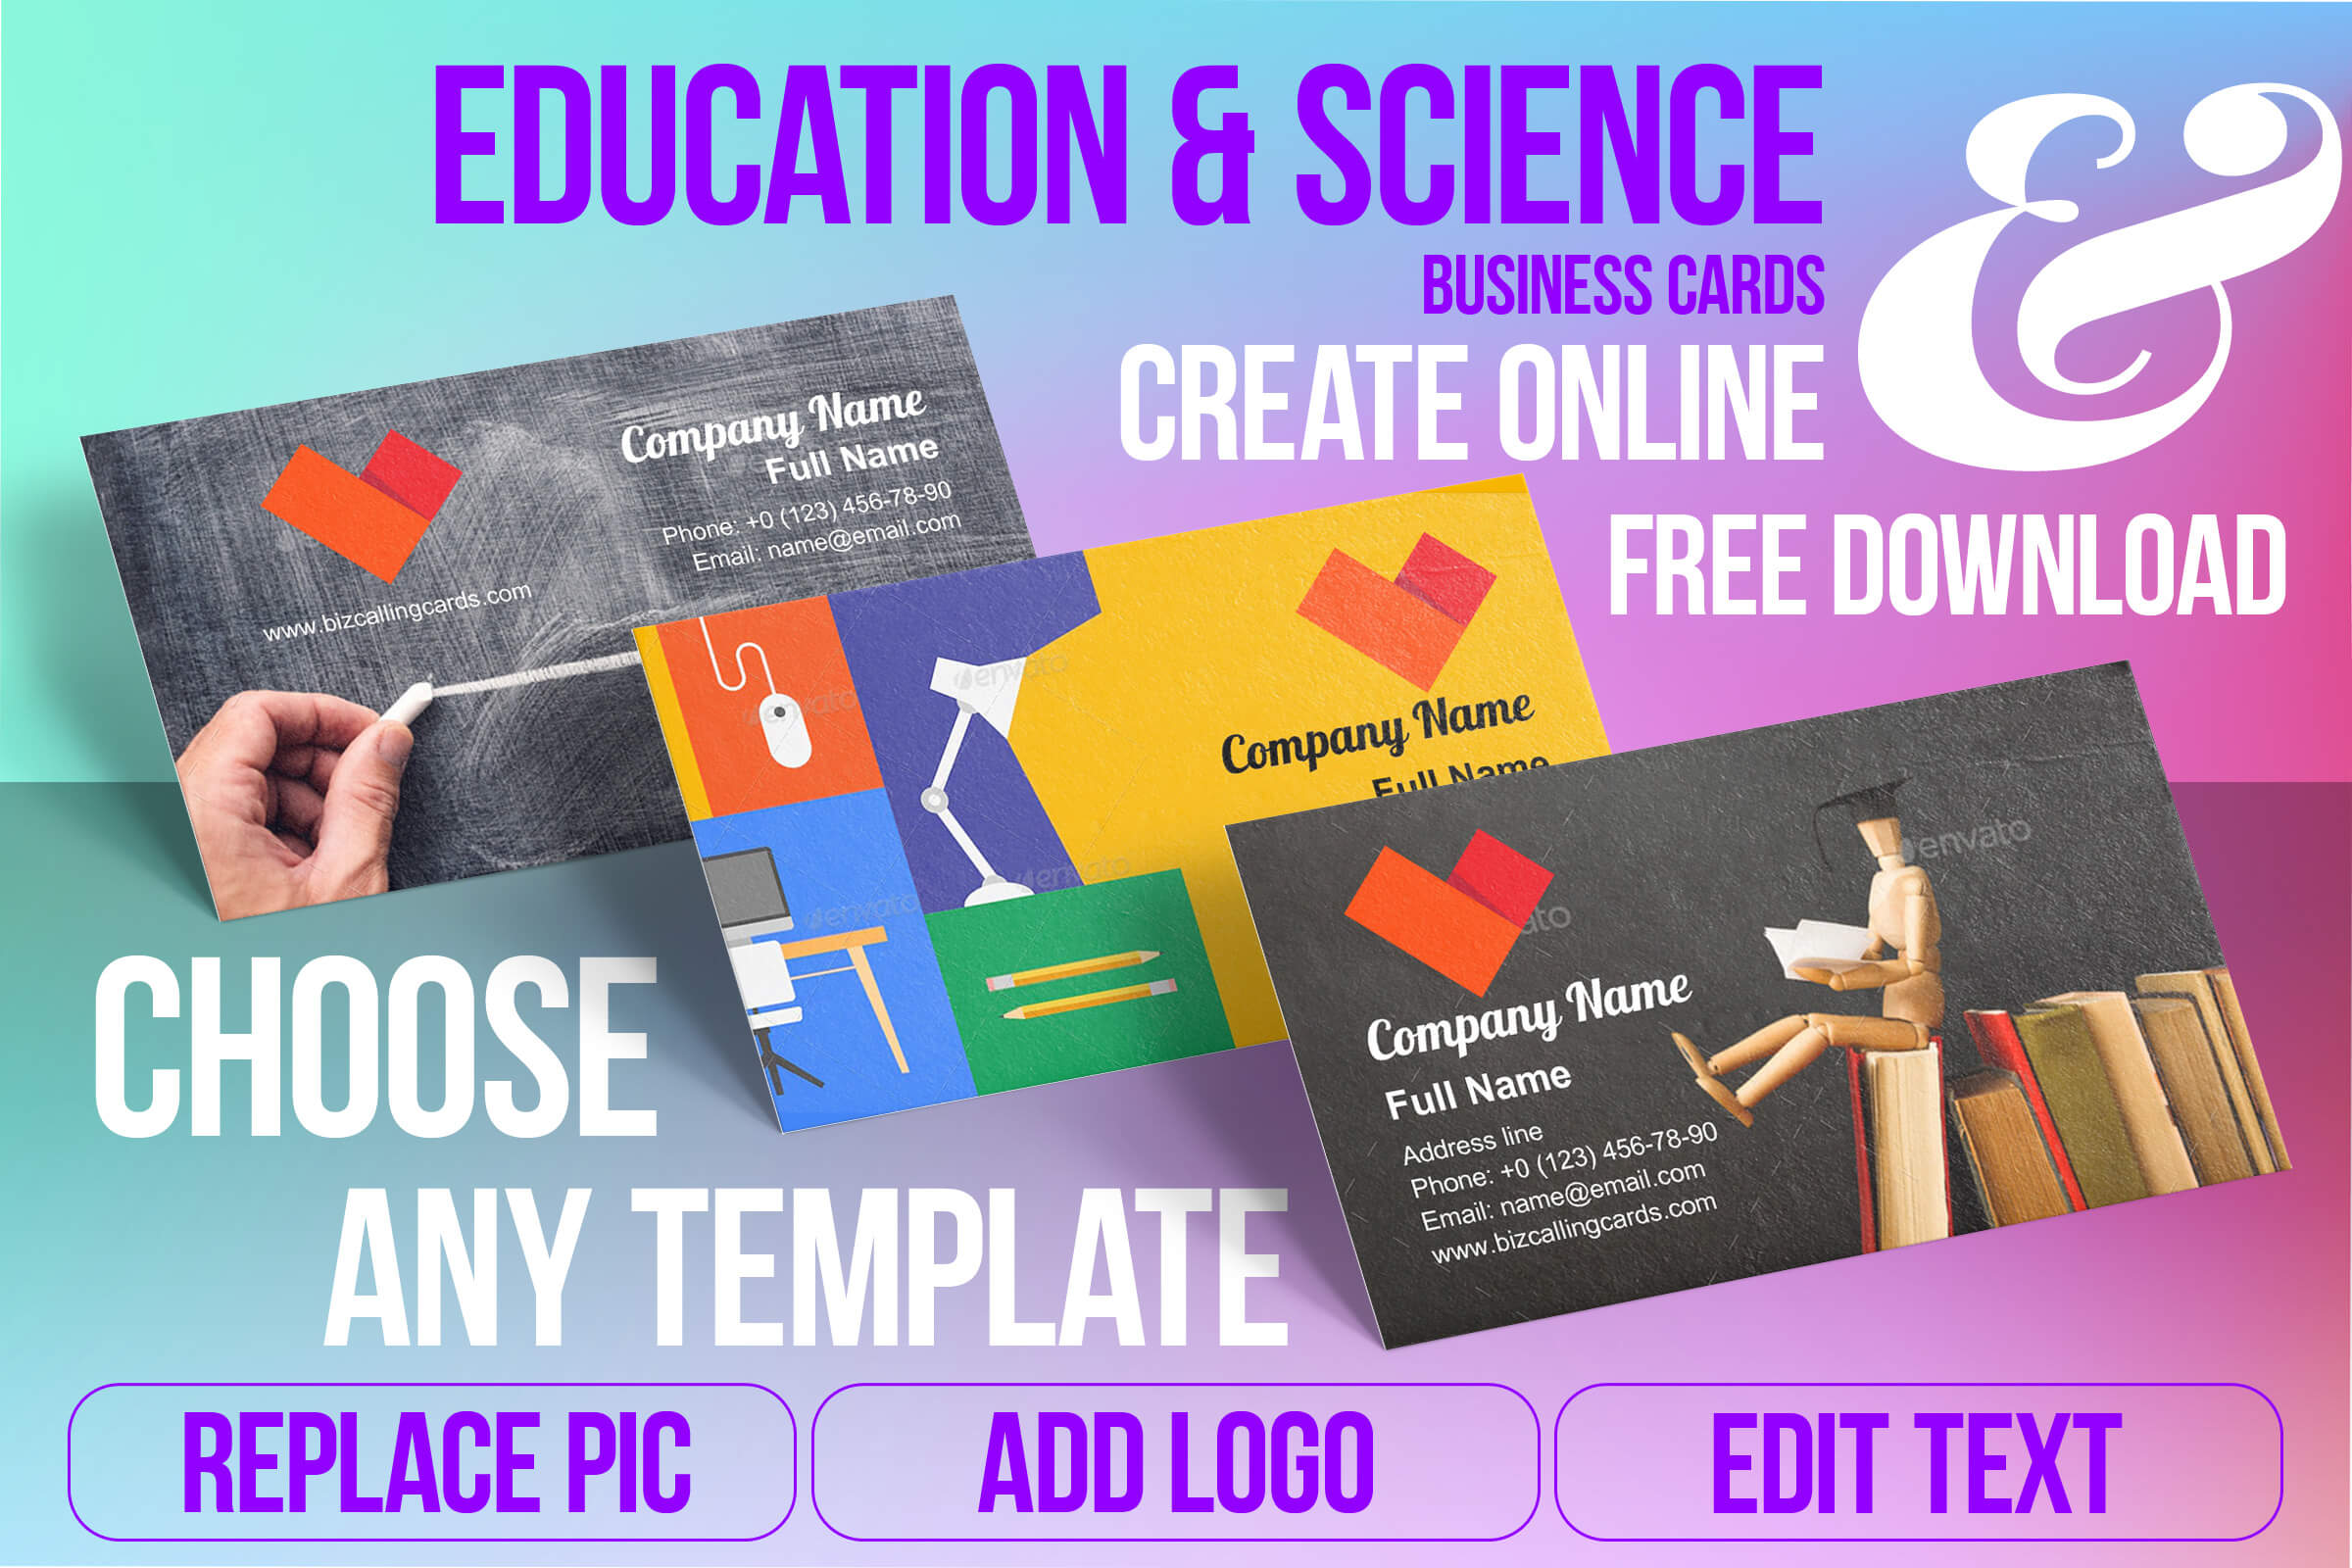 Education & Science Business Card Samples For Create Custom For Business Cards For Teachers Templates Free